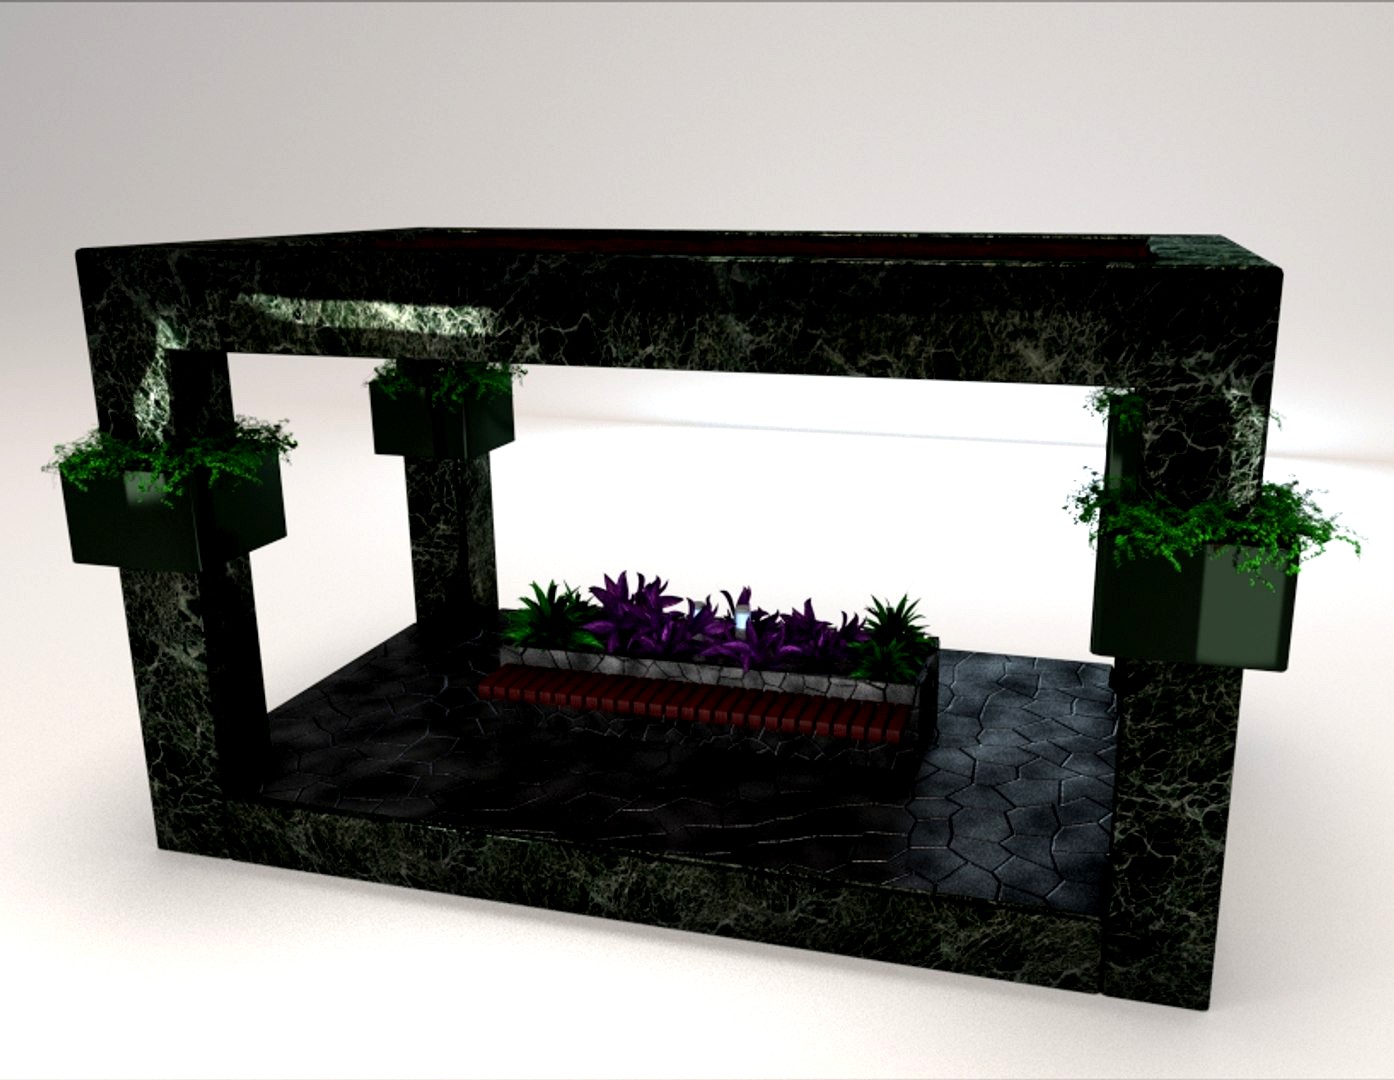 (Important textures coming back soon after improvements)Cuboid gazebo bench area